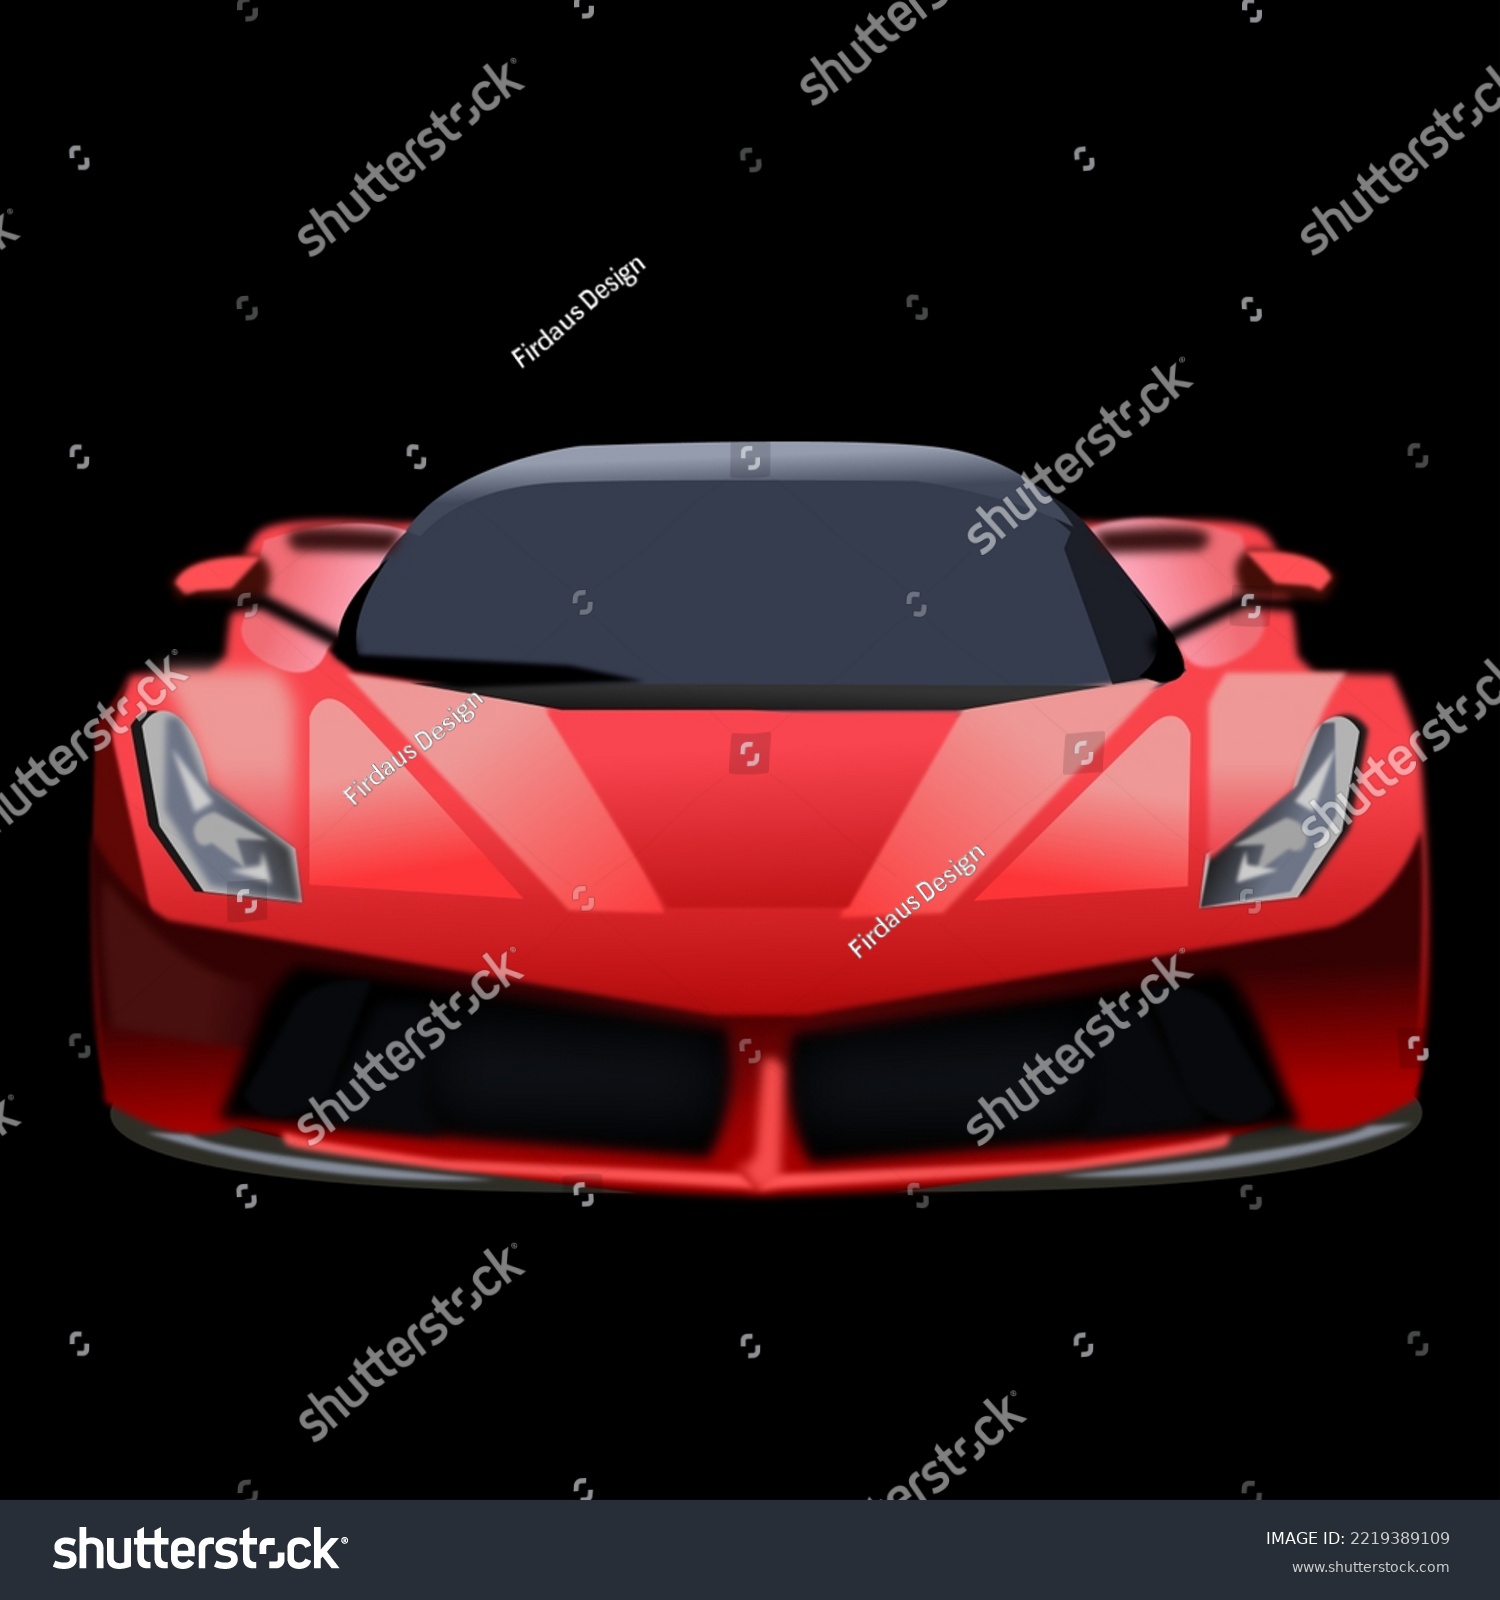 SVG of super car for high speed ferrary rich car expensive vector svg